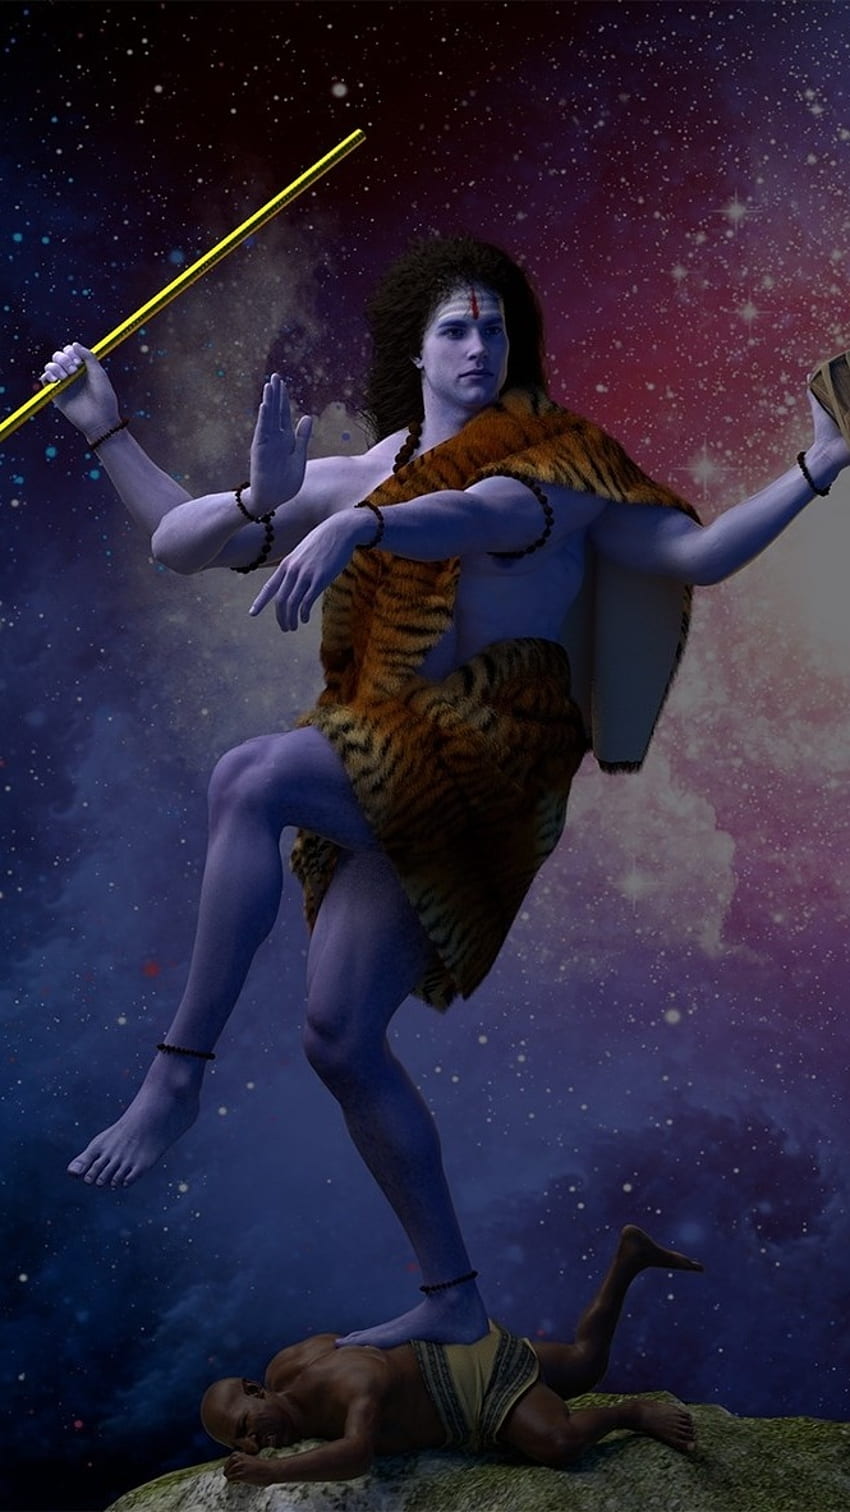 Top Lord Shiva Rudra Images Amazing Collection Lord Shiva Rudra Images Full K